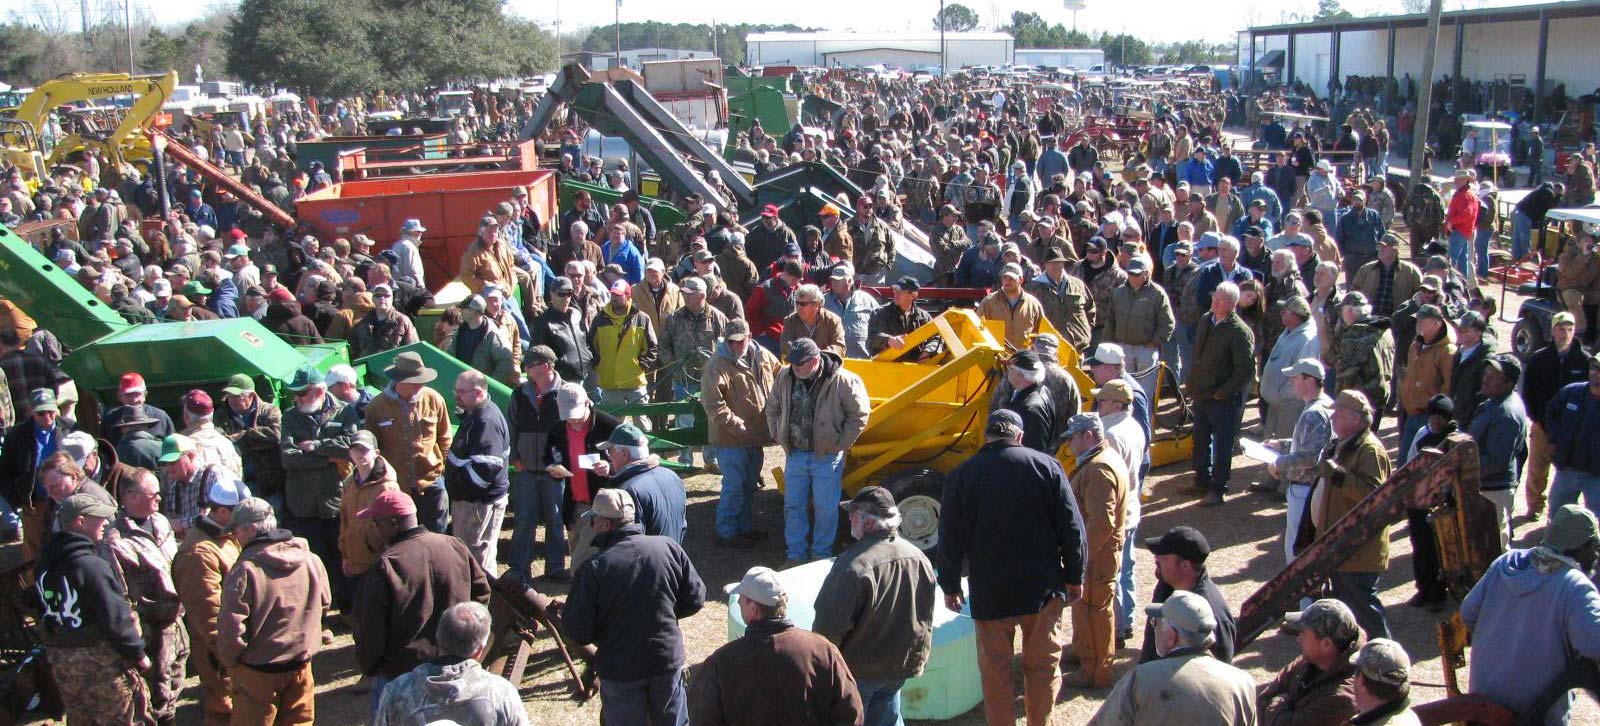 group of buyers at an auction event